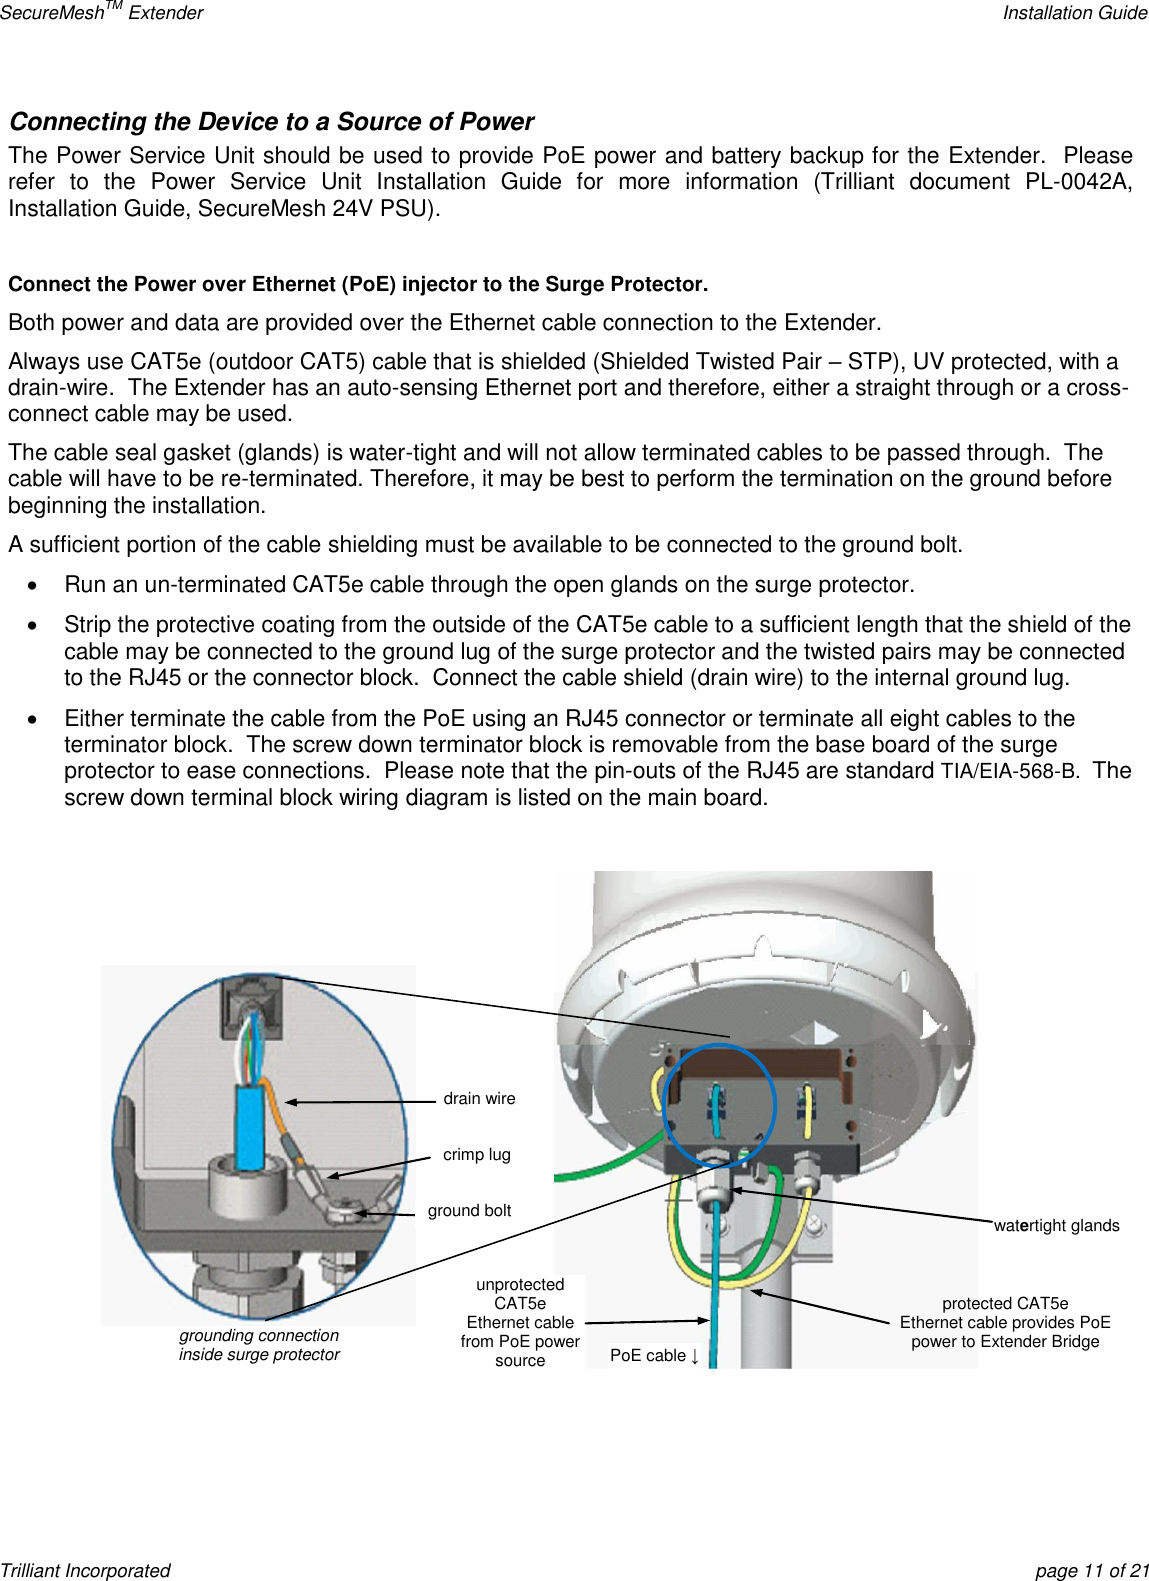 SecureMeshTM Extender    Installation Guide Trilliant Incorporated  page 11 of 21 Connecting the Device to a Source of Power The Power Service Unit should be used to provide PoE power and battery backup for the Extender.  Please refer  to  the  Power  Service  Unit  Installation  Guide  for  more  information  (Trilliant  document  PL-0042A, Installation Guide, SecureMesh 24V PSU).  Connect the Power over Ethernet (PoE) injector to the Surge Protector. Both power and data are provided over the Ethernet cable connection to the Extender. Always use CAT5e (outdoor CAT5) cable that is shielded (Shielded Twisted Pair – STP), UV protected, with a drain-wire.  The Extender has an auto-sensing Ethernet port and therefore, either a straight through or a cross-connect cable may be used. The cable seal gasket (glands) is water-tight and will not allow terminated cables to be passed through.  The cable will have to be re-terminated. Therefore, it may be best to perform the termination on the ground before beginning the installation. A sufficient portion of the cable shielding must be available to be connected to the ground bolt.   Run an un-terminated CAT5e cable through the open glands on the surge protector.   Strip the protective coating from the outside of the CAT5e cable to a sufficient length that the shield of the cable may be connected to the ground lug of the surge protector and the twisted pairs may be connected to the RJ45 or the connector block.  Connect the cable shield (drain wire) to the internal ground lug.   Either terminate the cable from the PoE using an RJ45 connector or terminate all eight cables to the terminator block.  The screw down terminator block is removable from the base board of the surge protector to ease connections.  Please note that the pin-outs of the RJ45 are standard TIA/EIA-568-B.  The screw down terminal block wiring diagram is listed on the main board.      drain wire crimp lug grounding connection inside surge protector ground bolt unprotected CAT5e Ethernet cable from PoE power source watertight glands PoE cable ↓ protected CAT5e Ethernet cable provides PoE power to Extender Bridge 